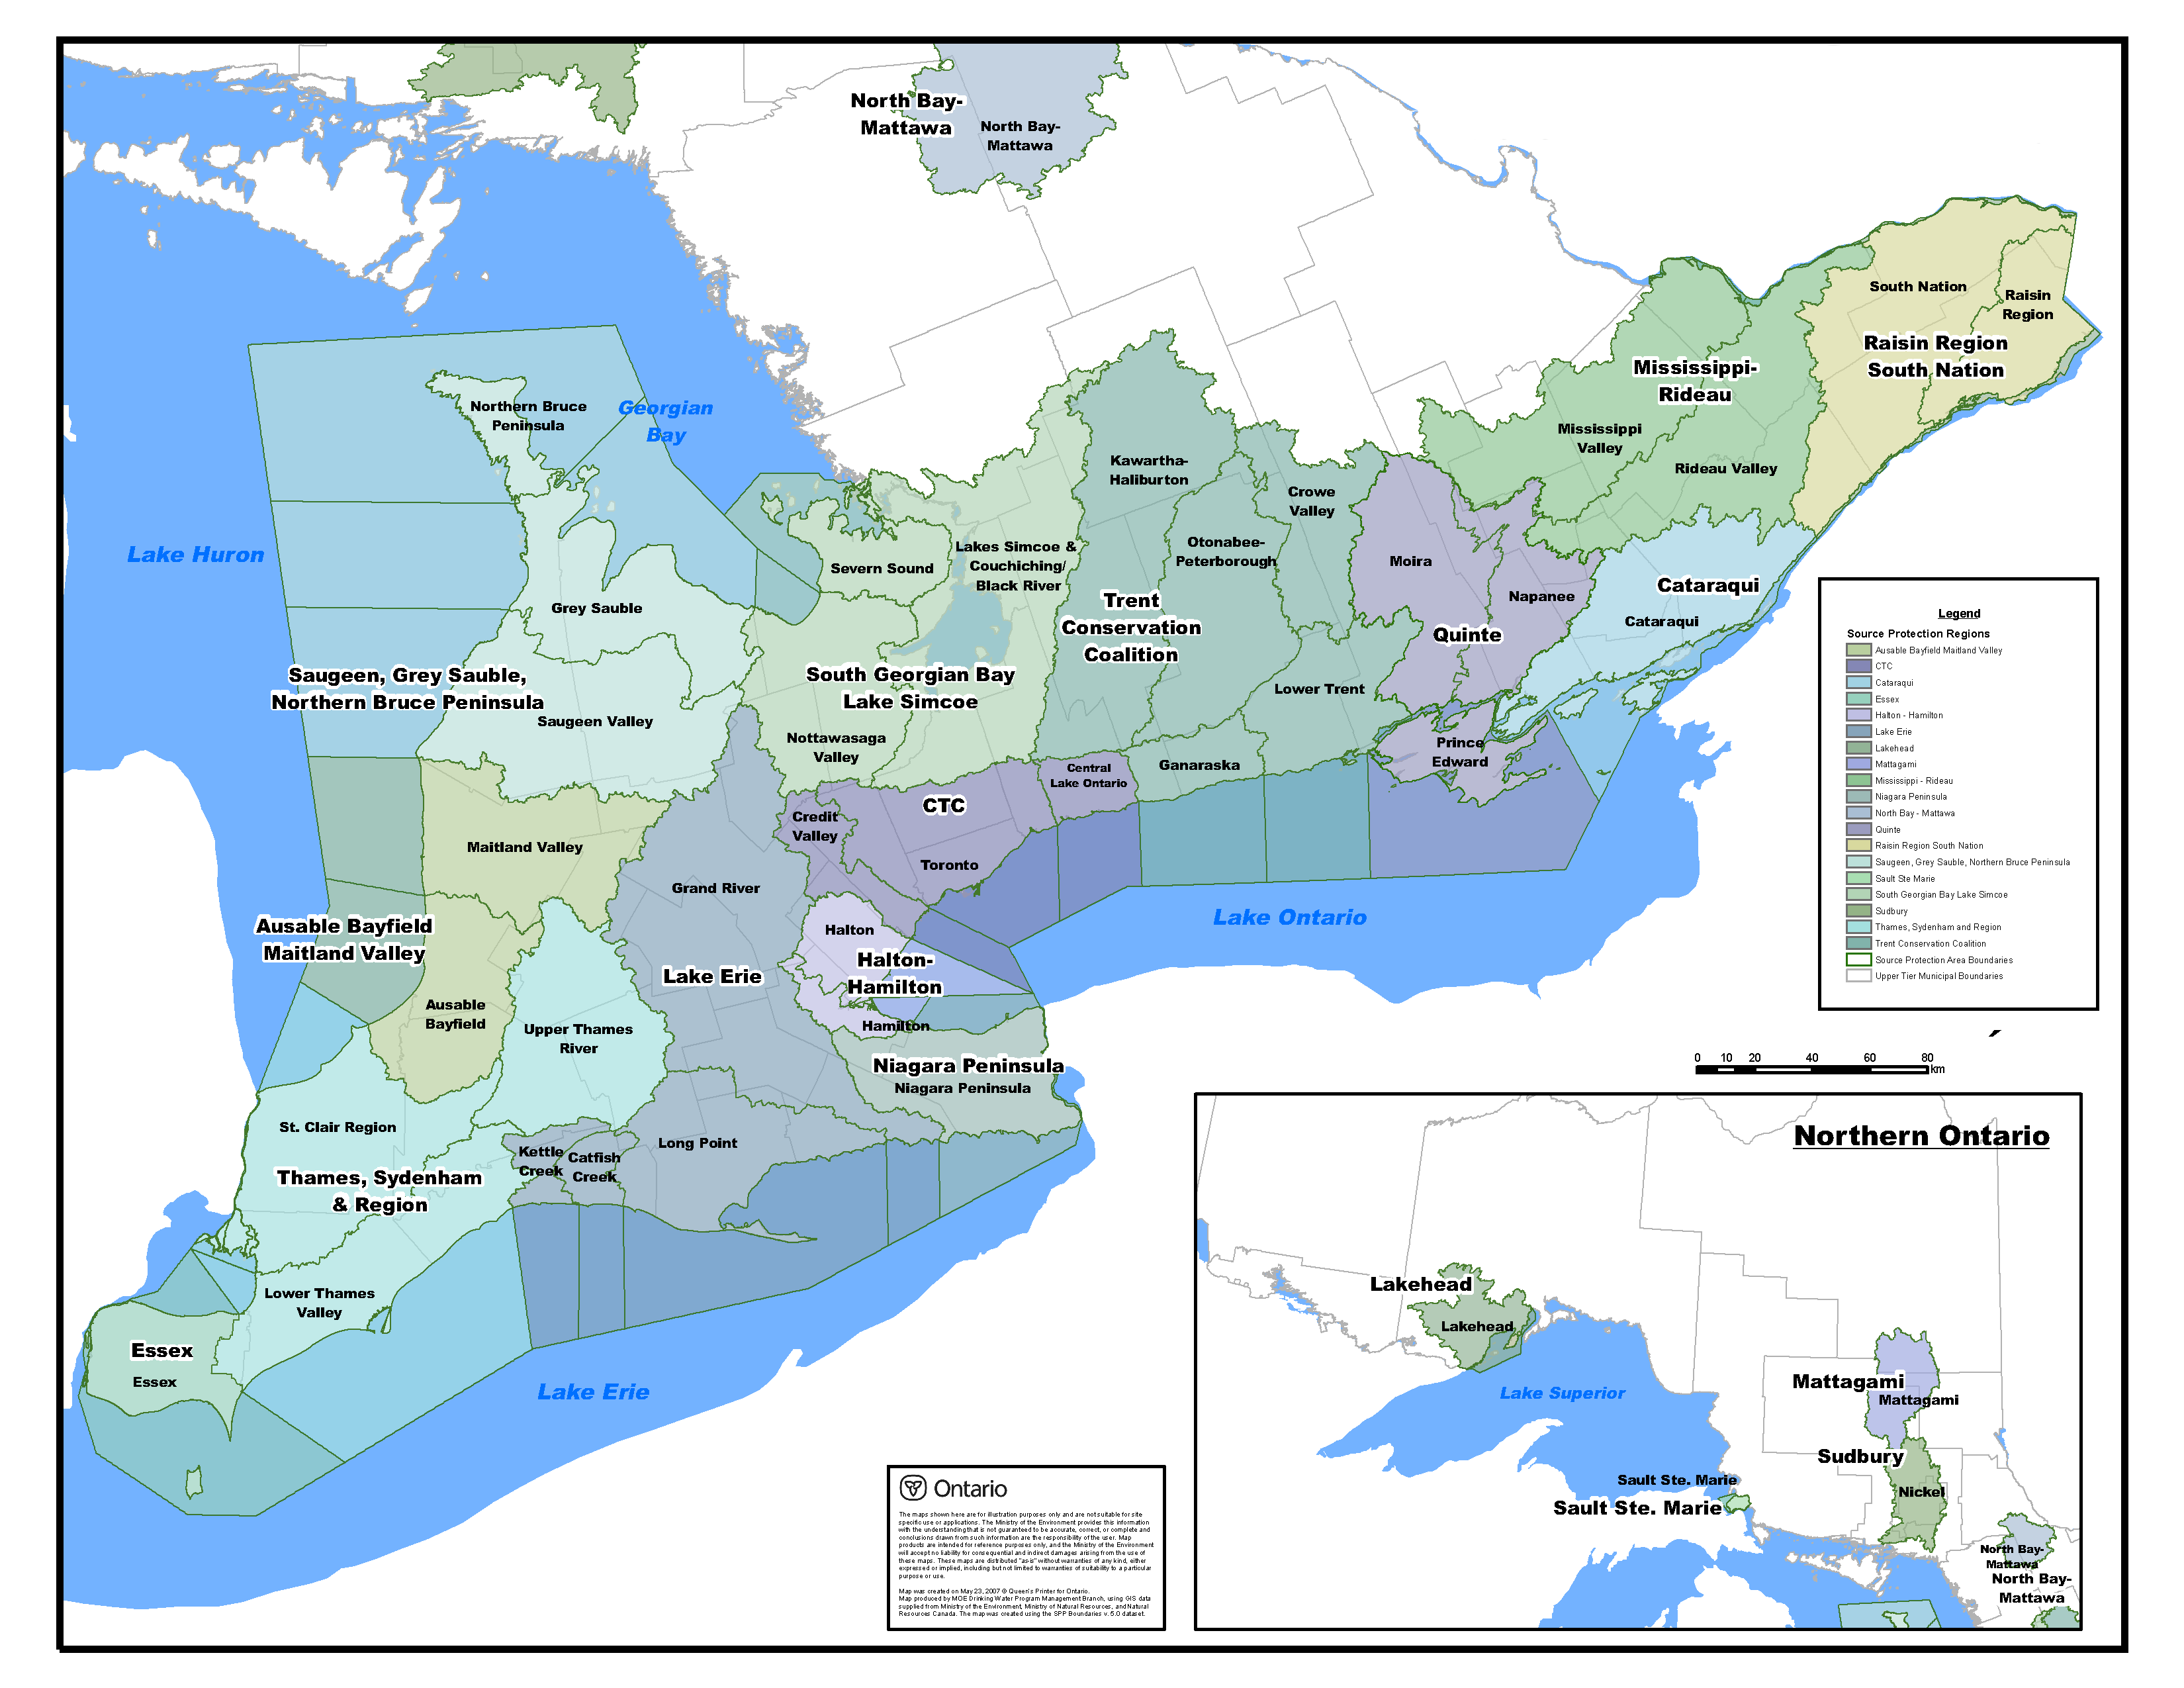 map of source proection committees in ontario